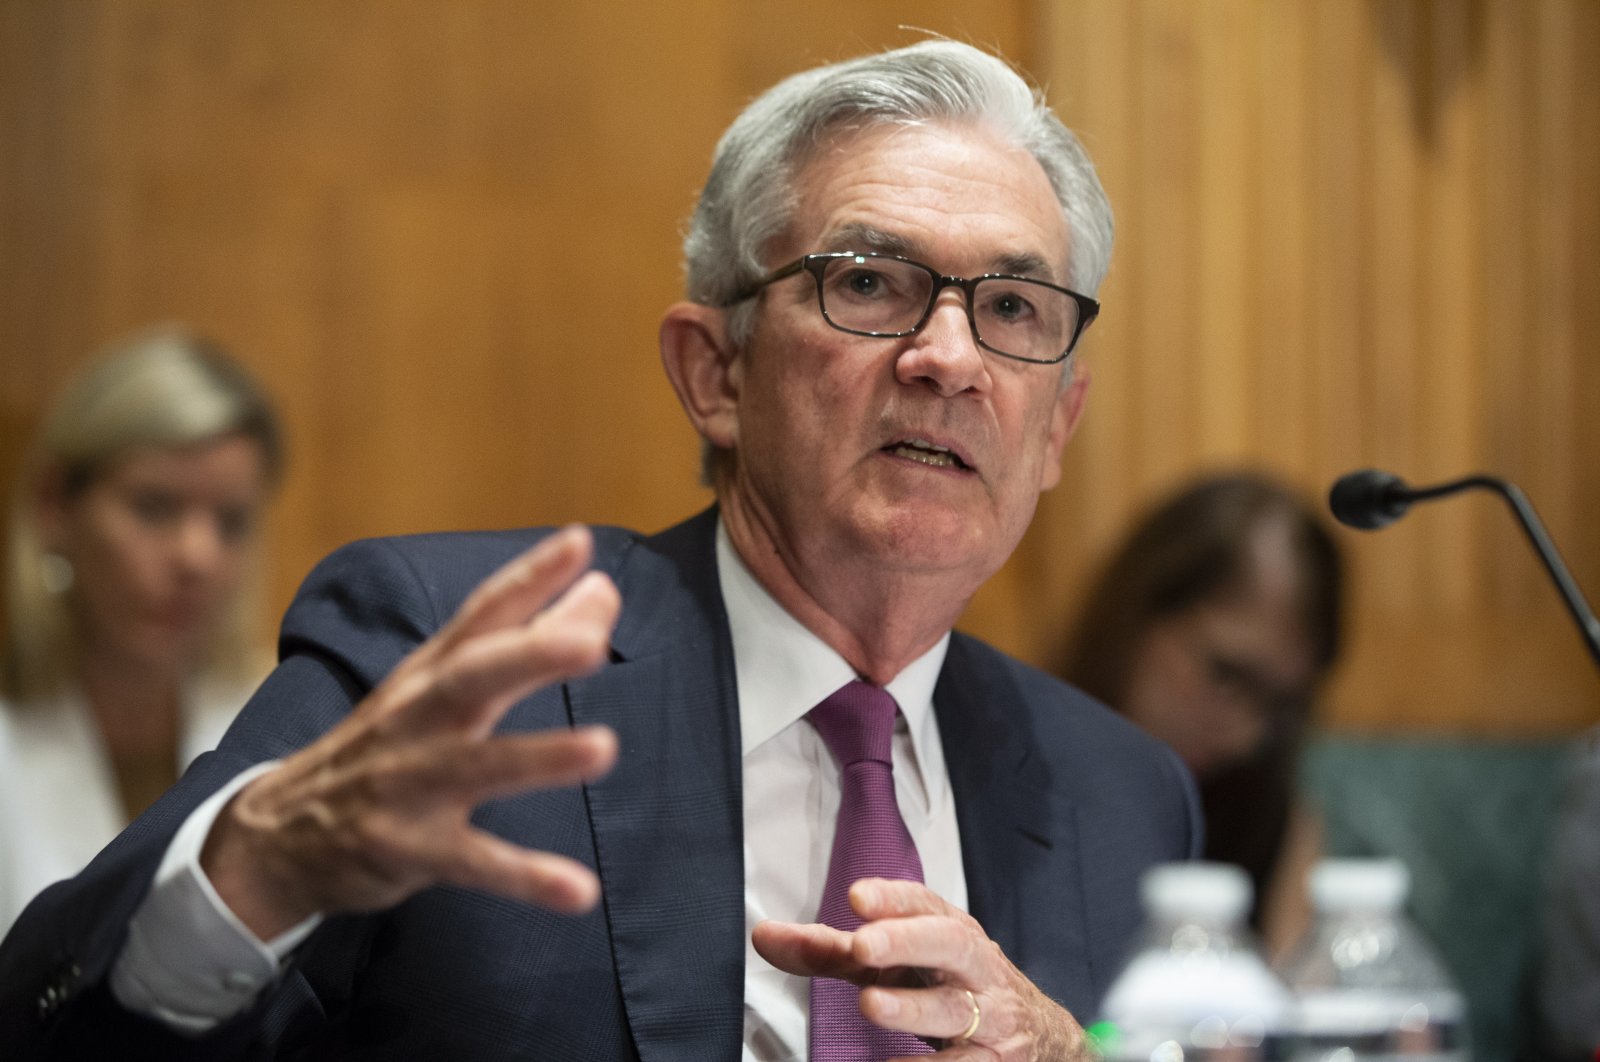 Federal Reserve Chairperson Jerome Powell testifies before a Senate Banking, Housing and Urban Affairs Committee hearing on "The Semiannual Monetary Policy Report to the Congress" on Capitol Hill in Washington, D.C., U.S., July 15, 2021. (EPA Photo)